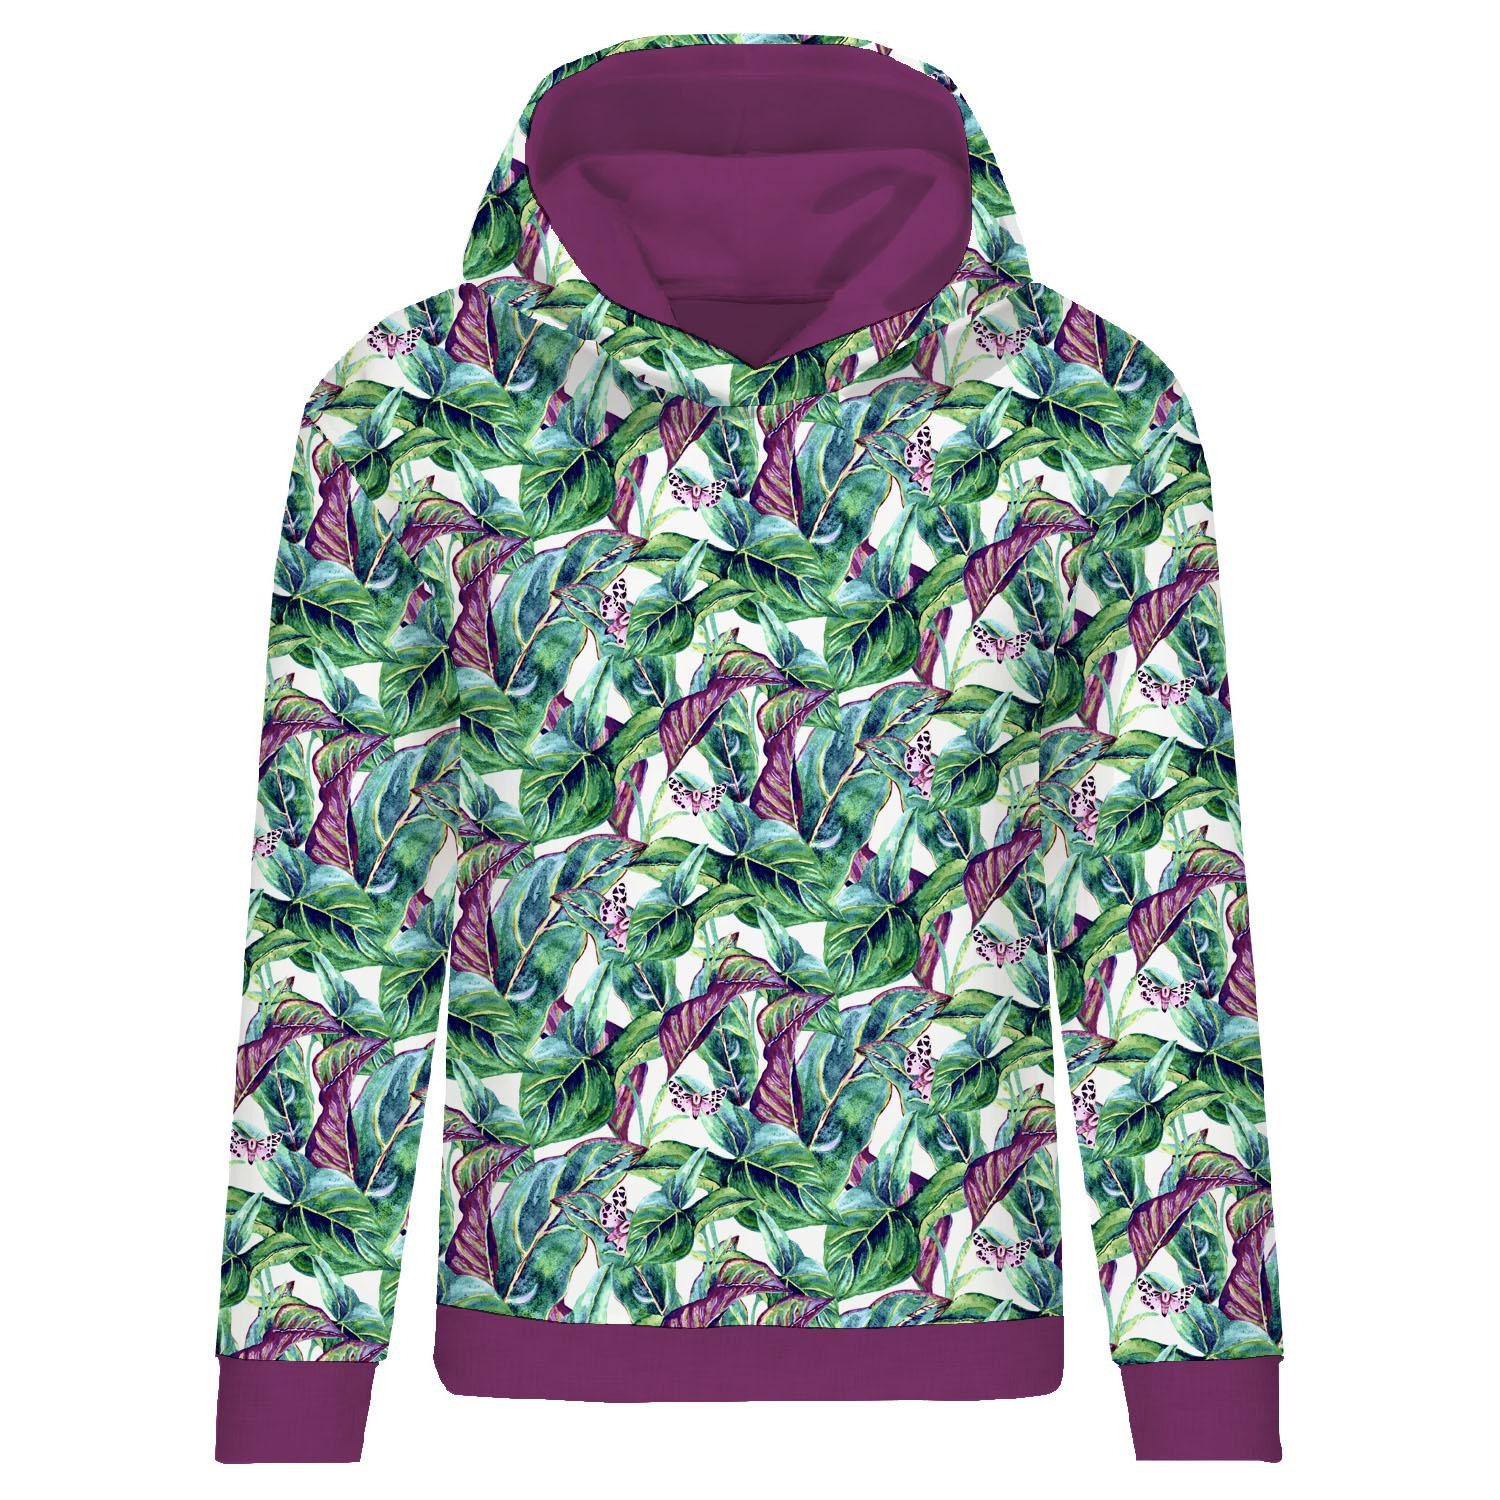 CLASSIC WOMEN’S HOODIE (POLA) - MINI LEAVES AND INSECTS PAT. 1 (TROPICAL NATURE) / white - looped knit fabric 